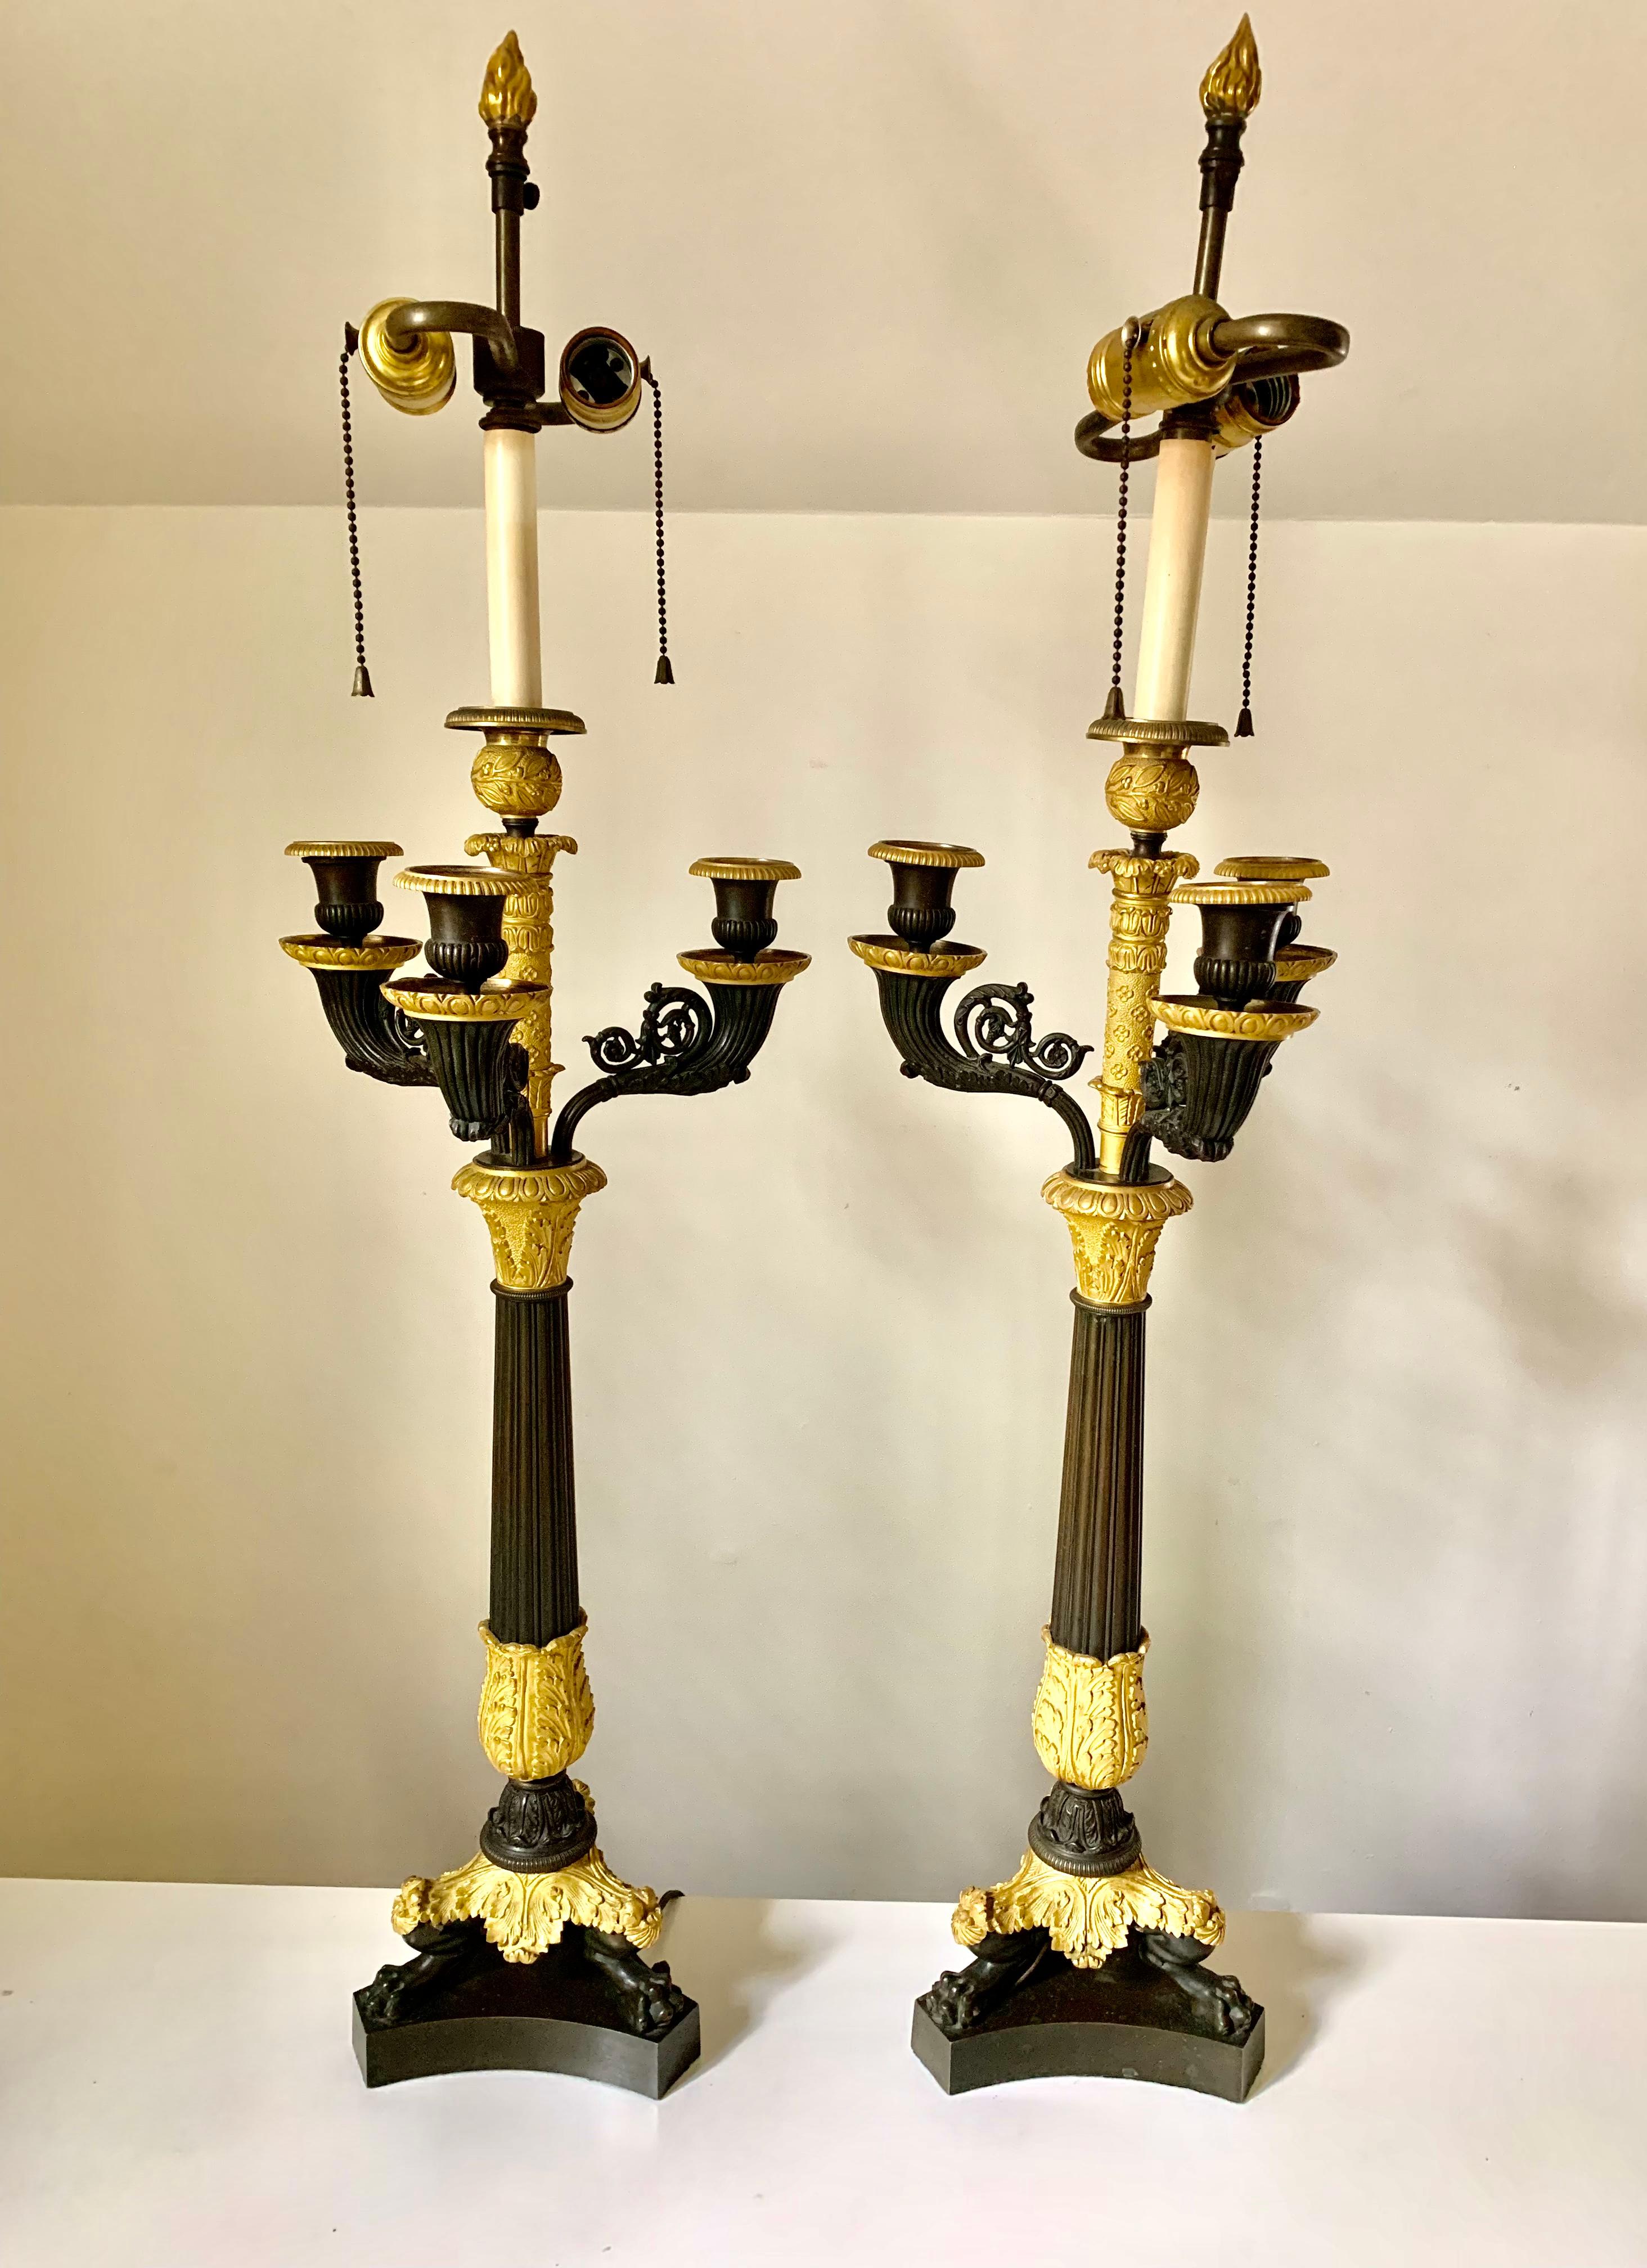 Pair Charles X Empire Period Gilt, Patinated Bronze Candelabra Lamps, circa 1830 For Sale 5